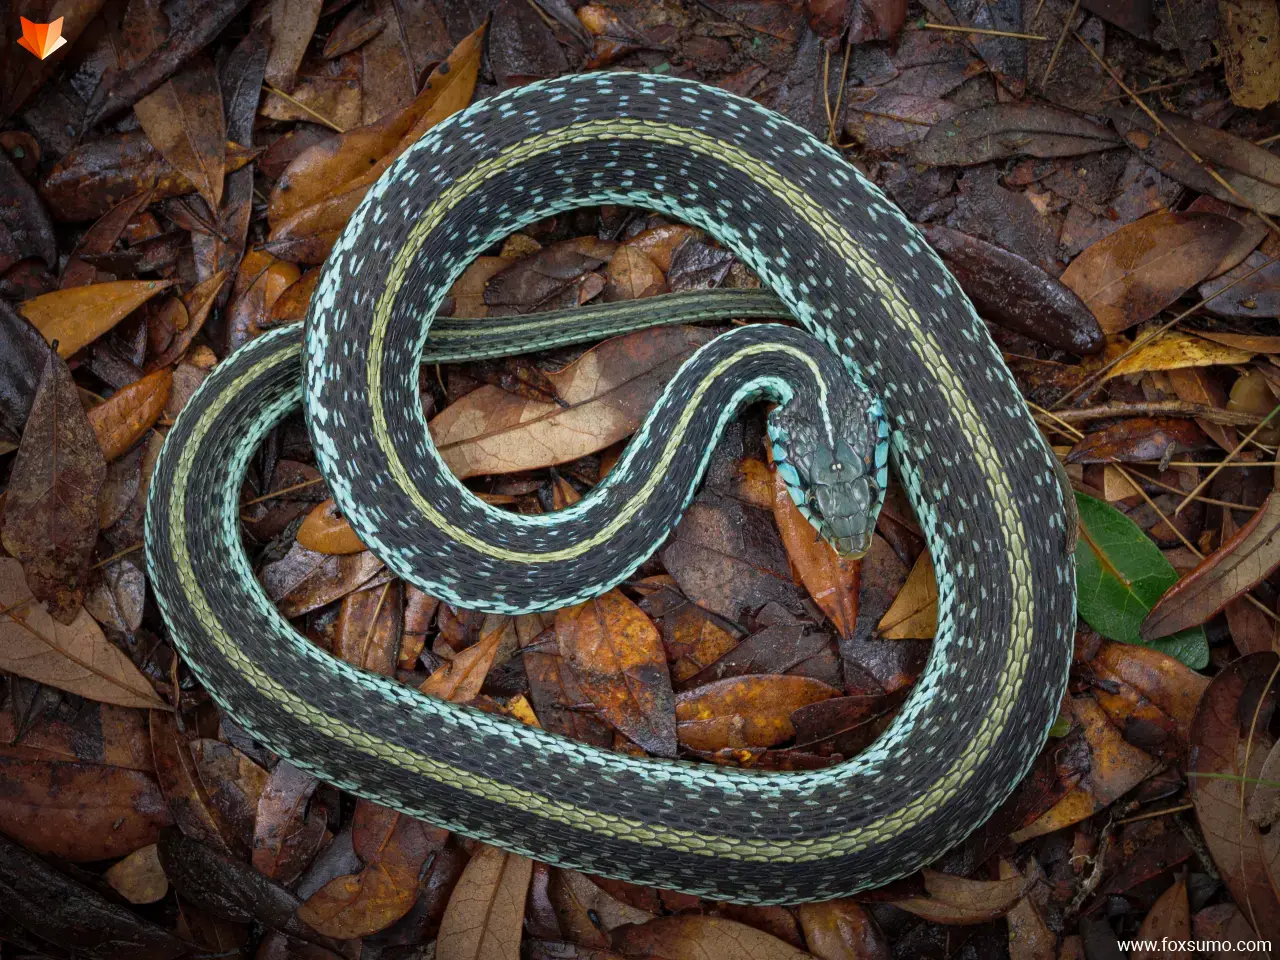 thamnophis sirtalis Cool Snakes